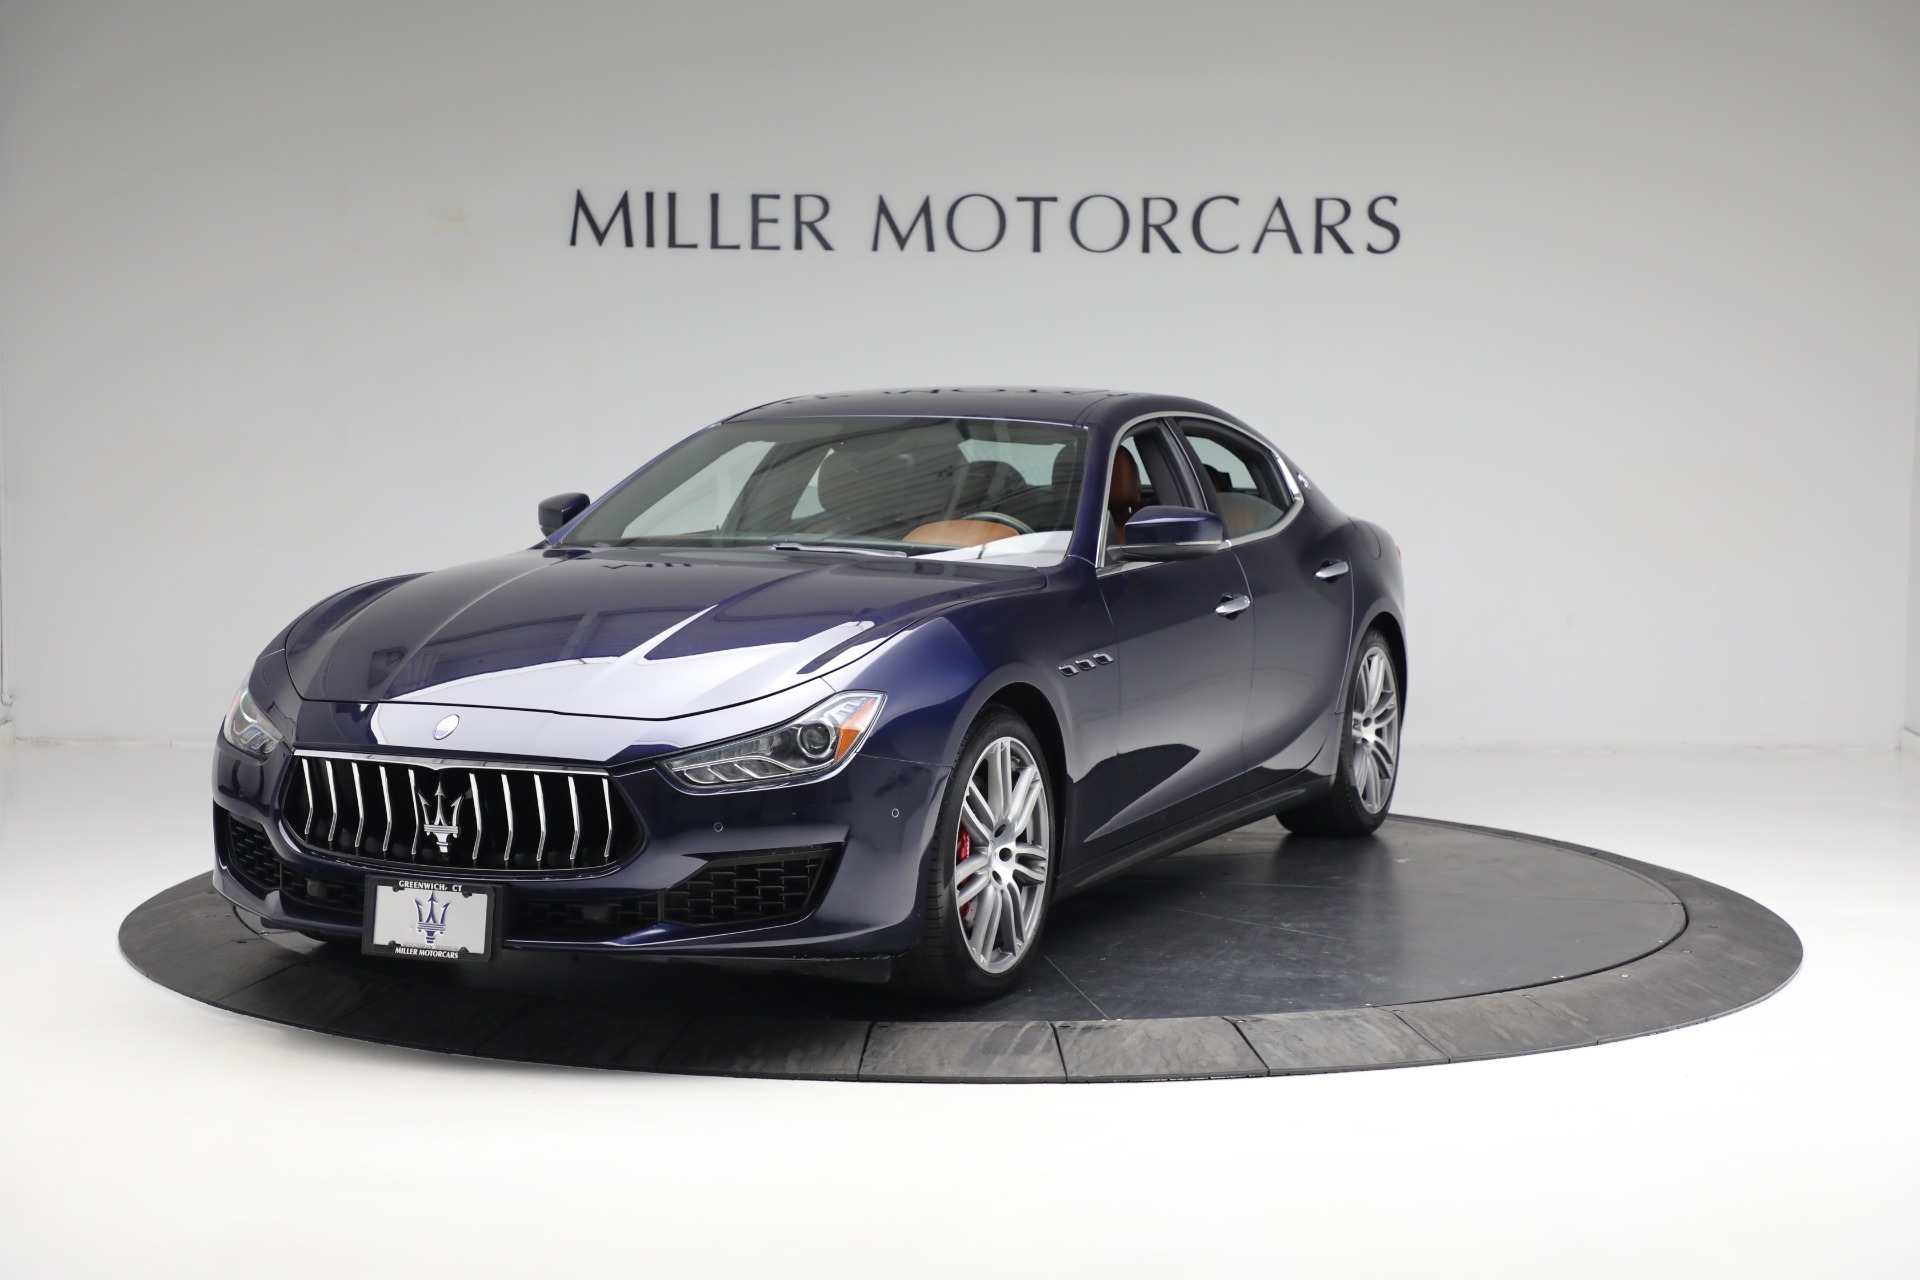 Used 2019 Maserati Ghibli S Q4 for sale Sold at Rolls-Royce Motor Cars Greenwich in Greenwich CT 06830 1